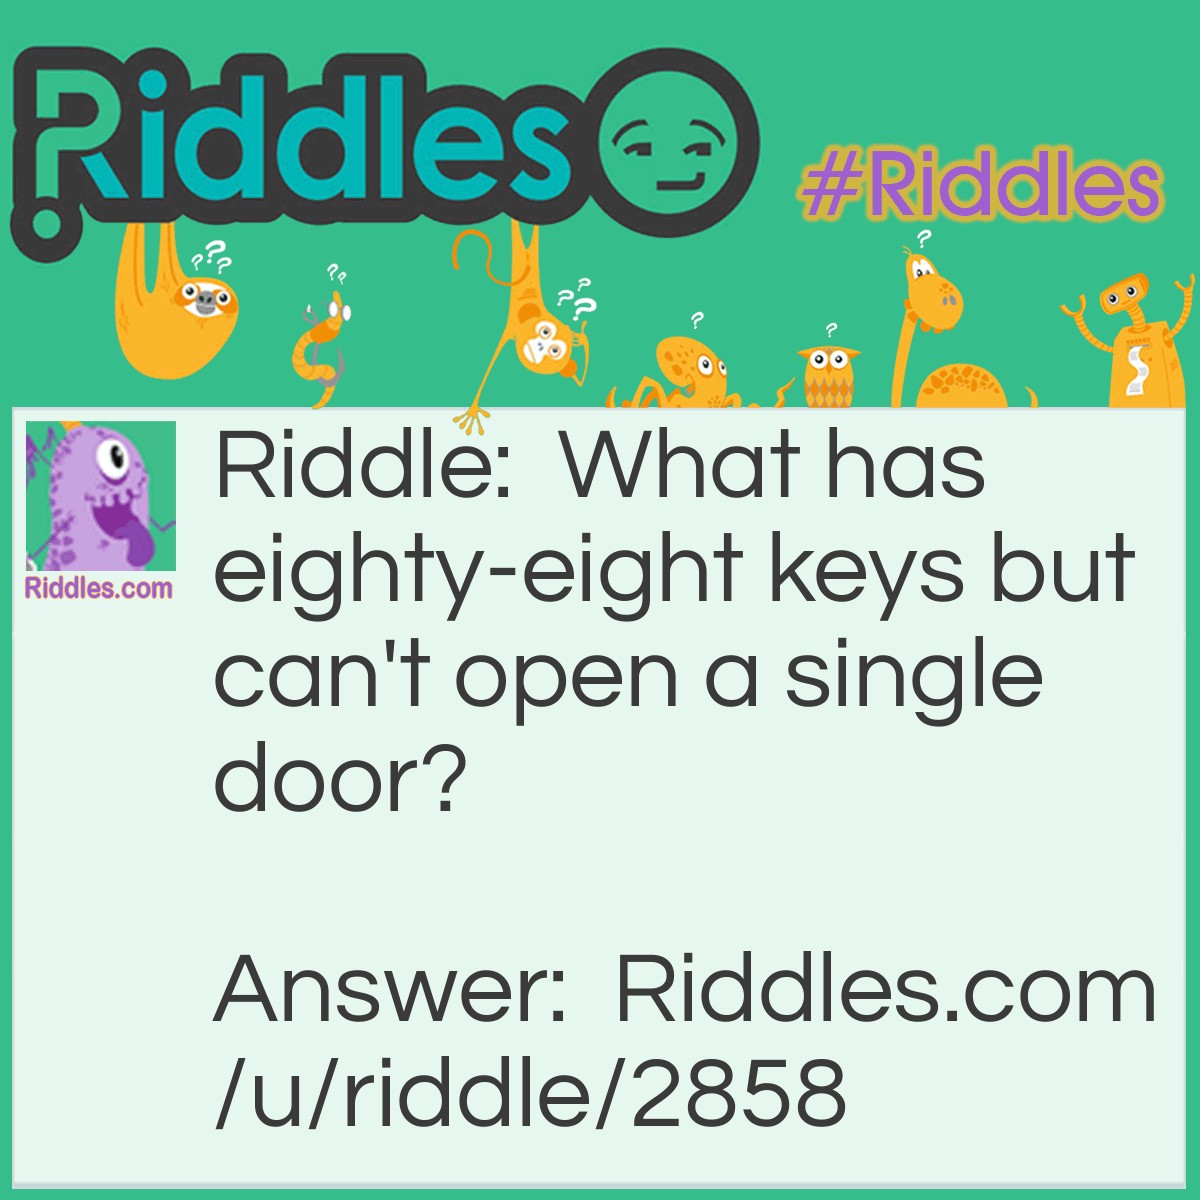 Riddle: What has eighty-eight keys but can't open a single door? Answer: A piano.